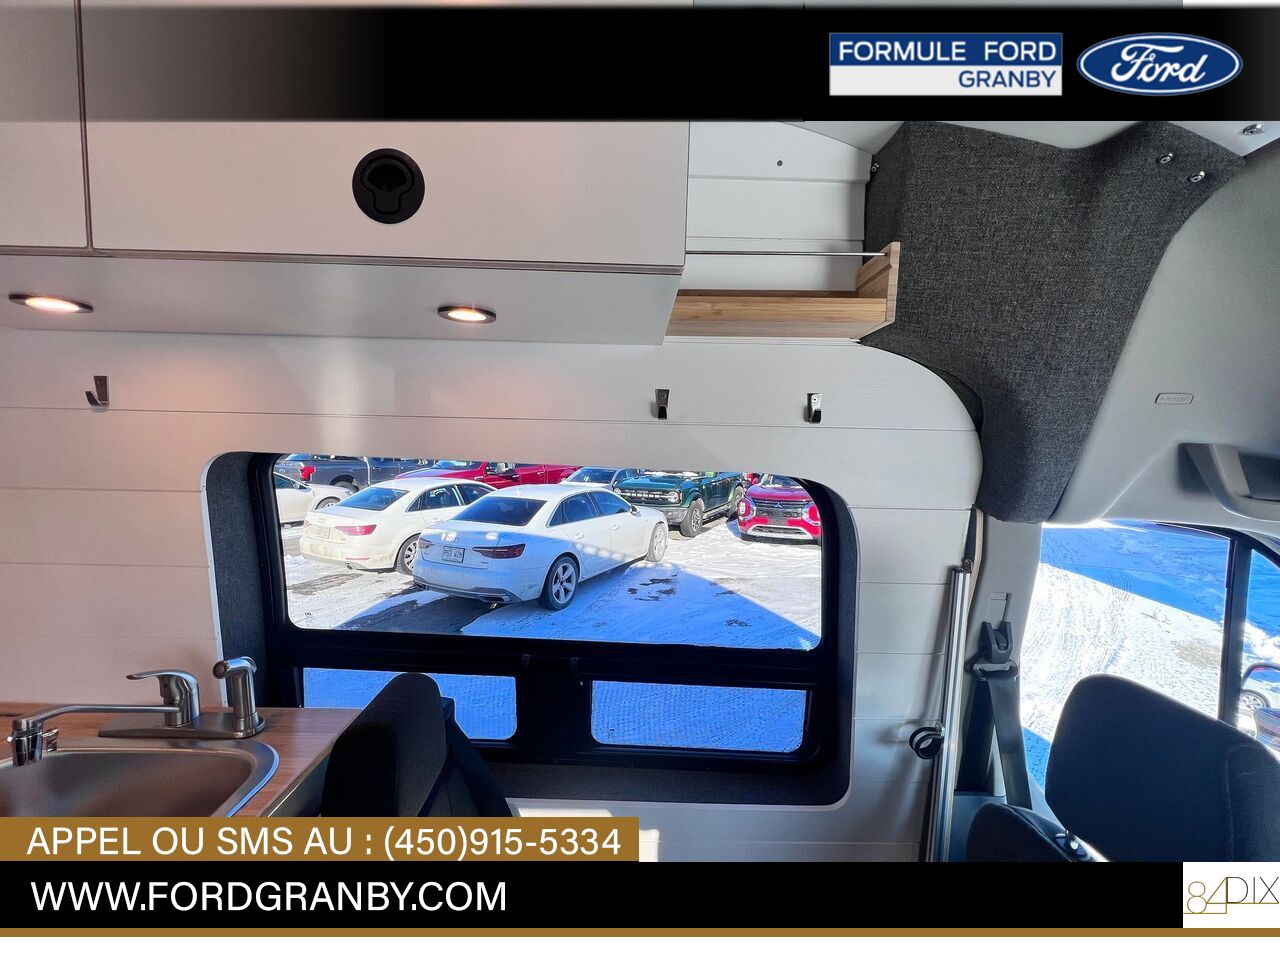 2019 Ford Transit fourgon utilitaire Granby - photo #29